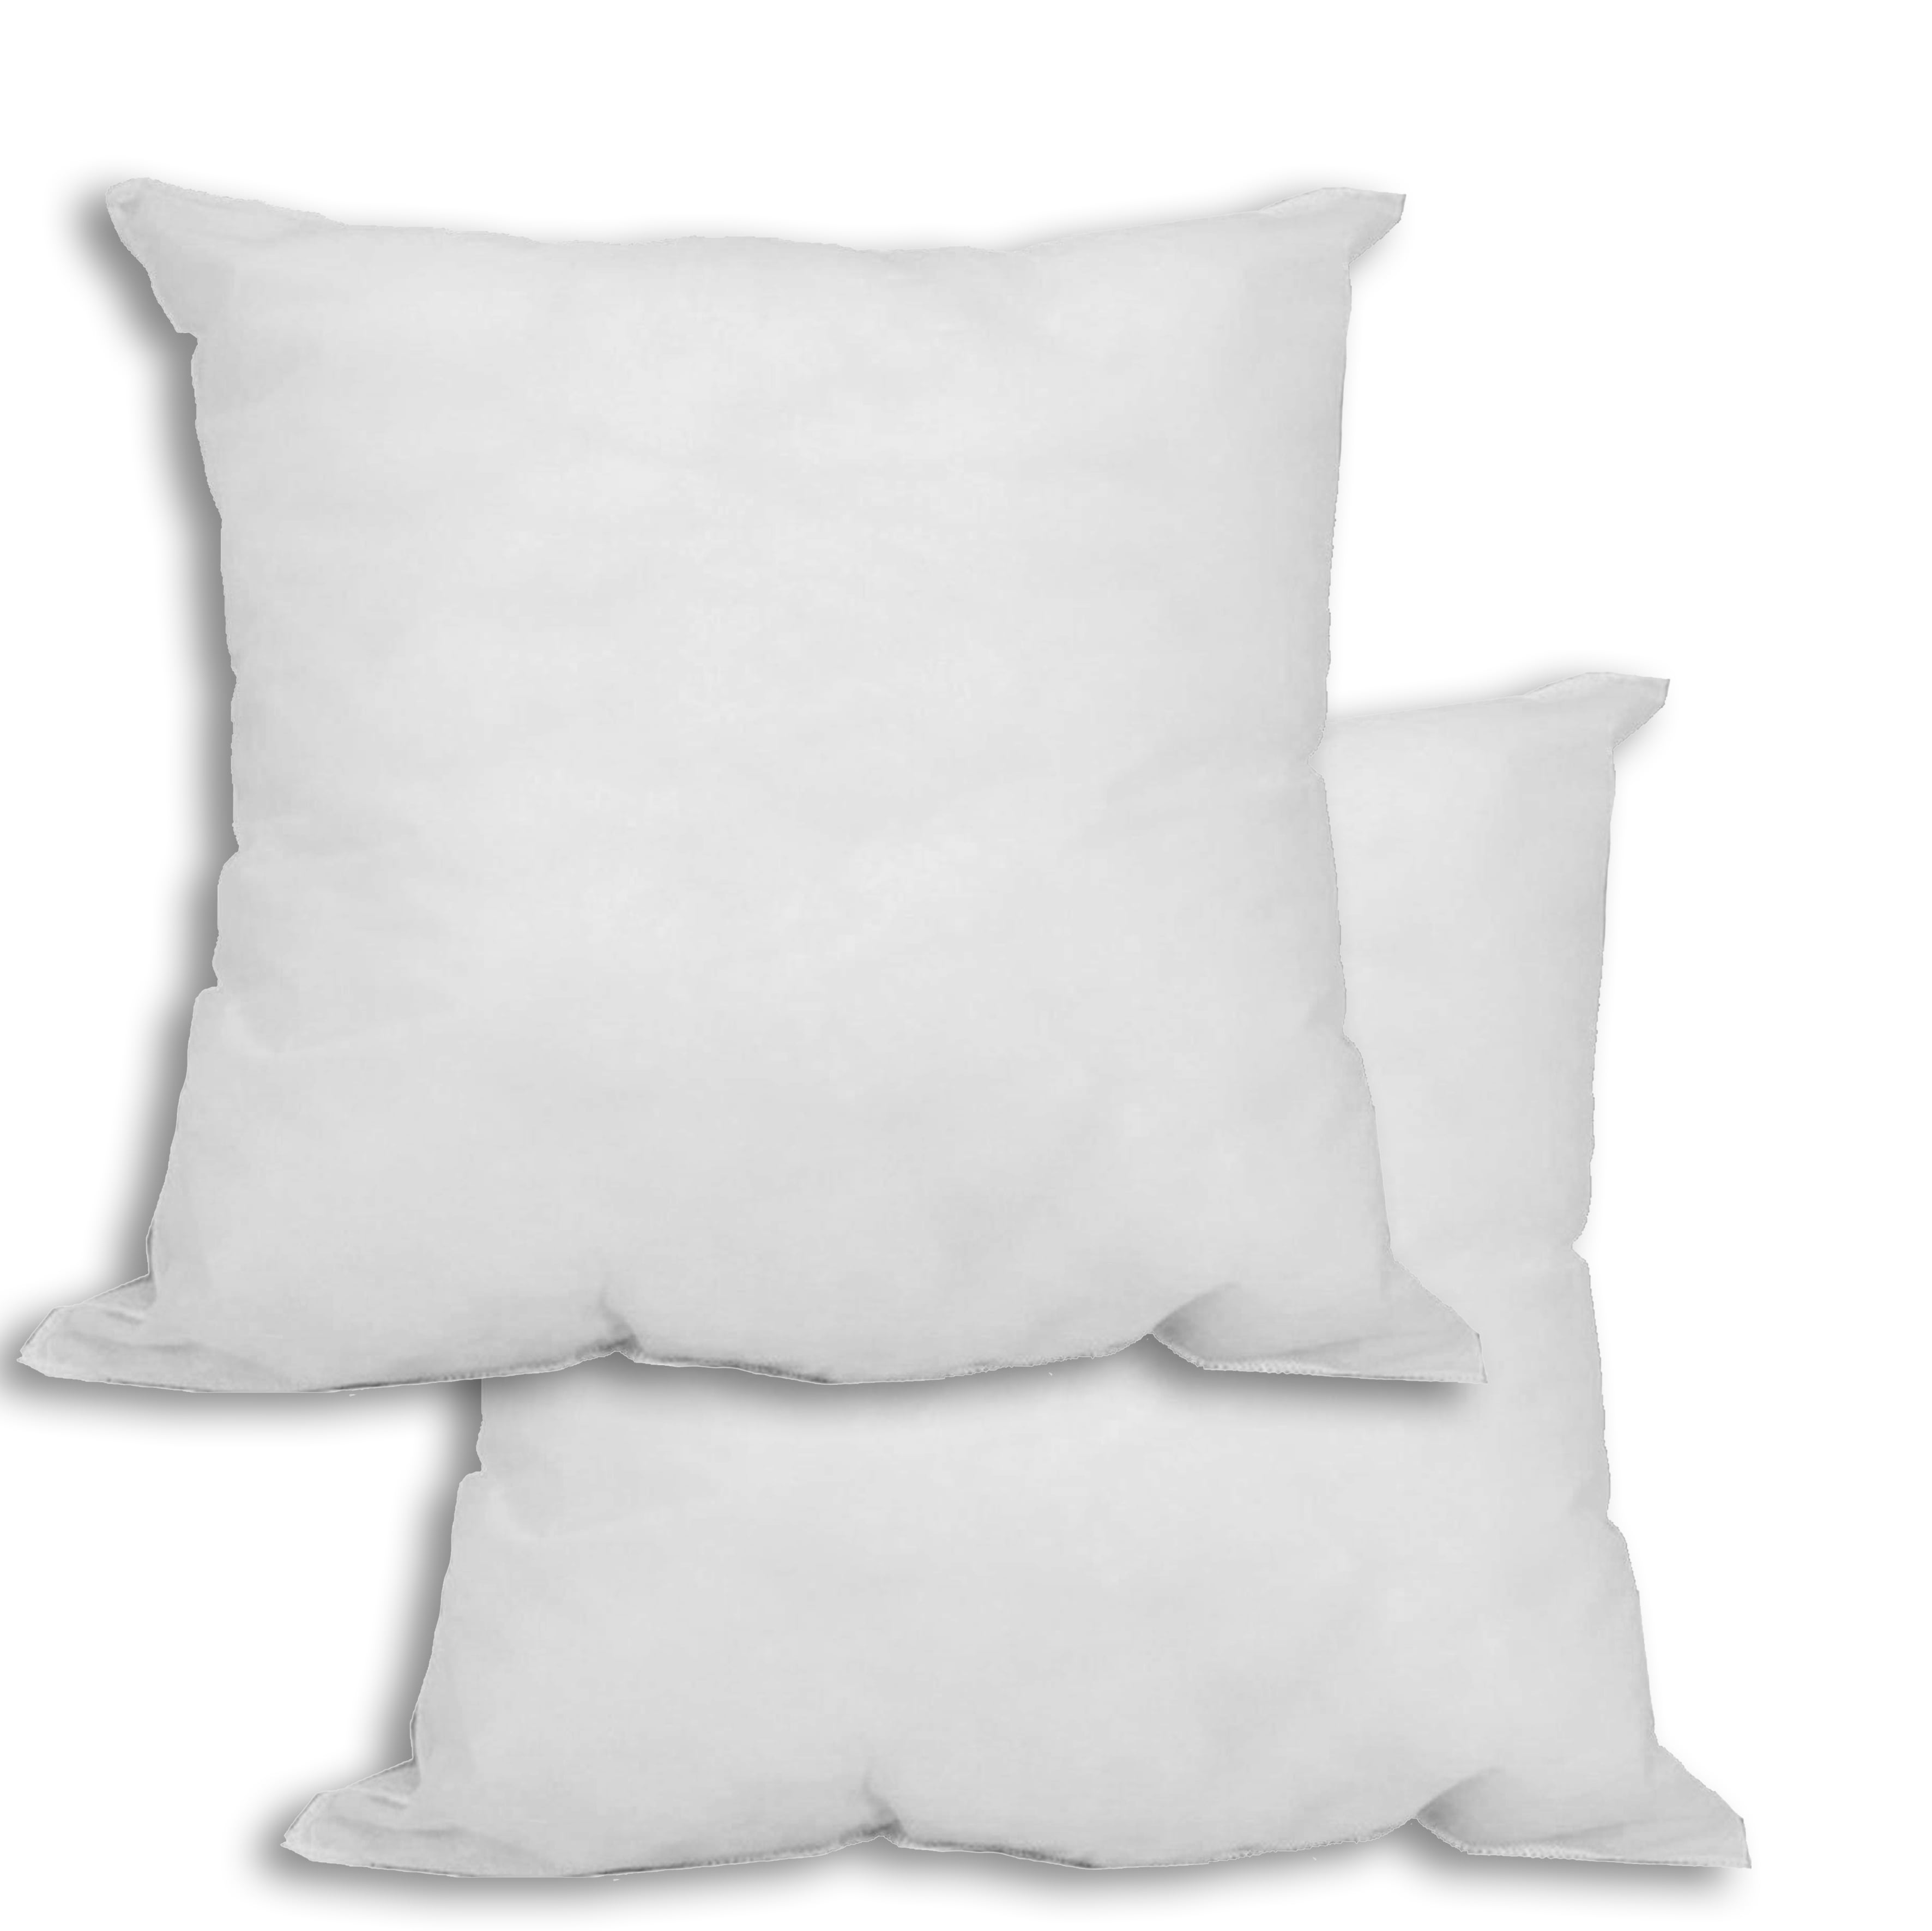 Calibrate Timing Throw Pillow Inserts Hypoallergenic Square Form Sham Decorative Pillows Cushion Stuffer 12 x 12